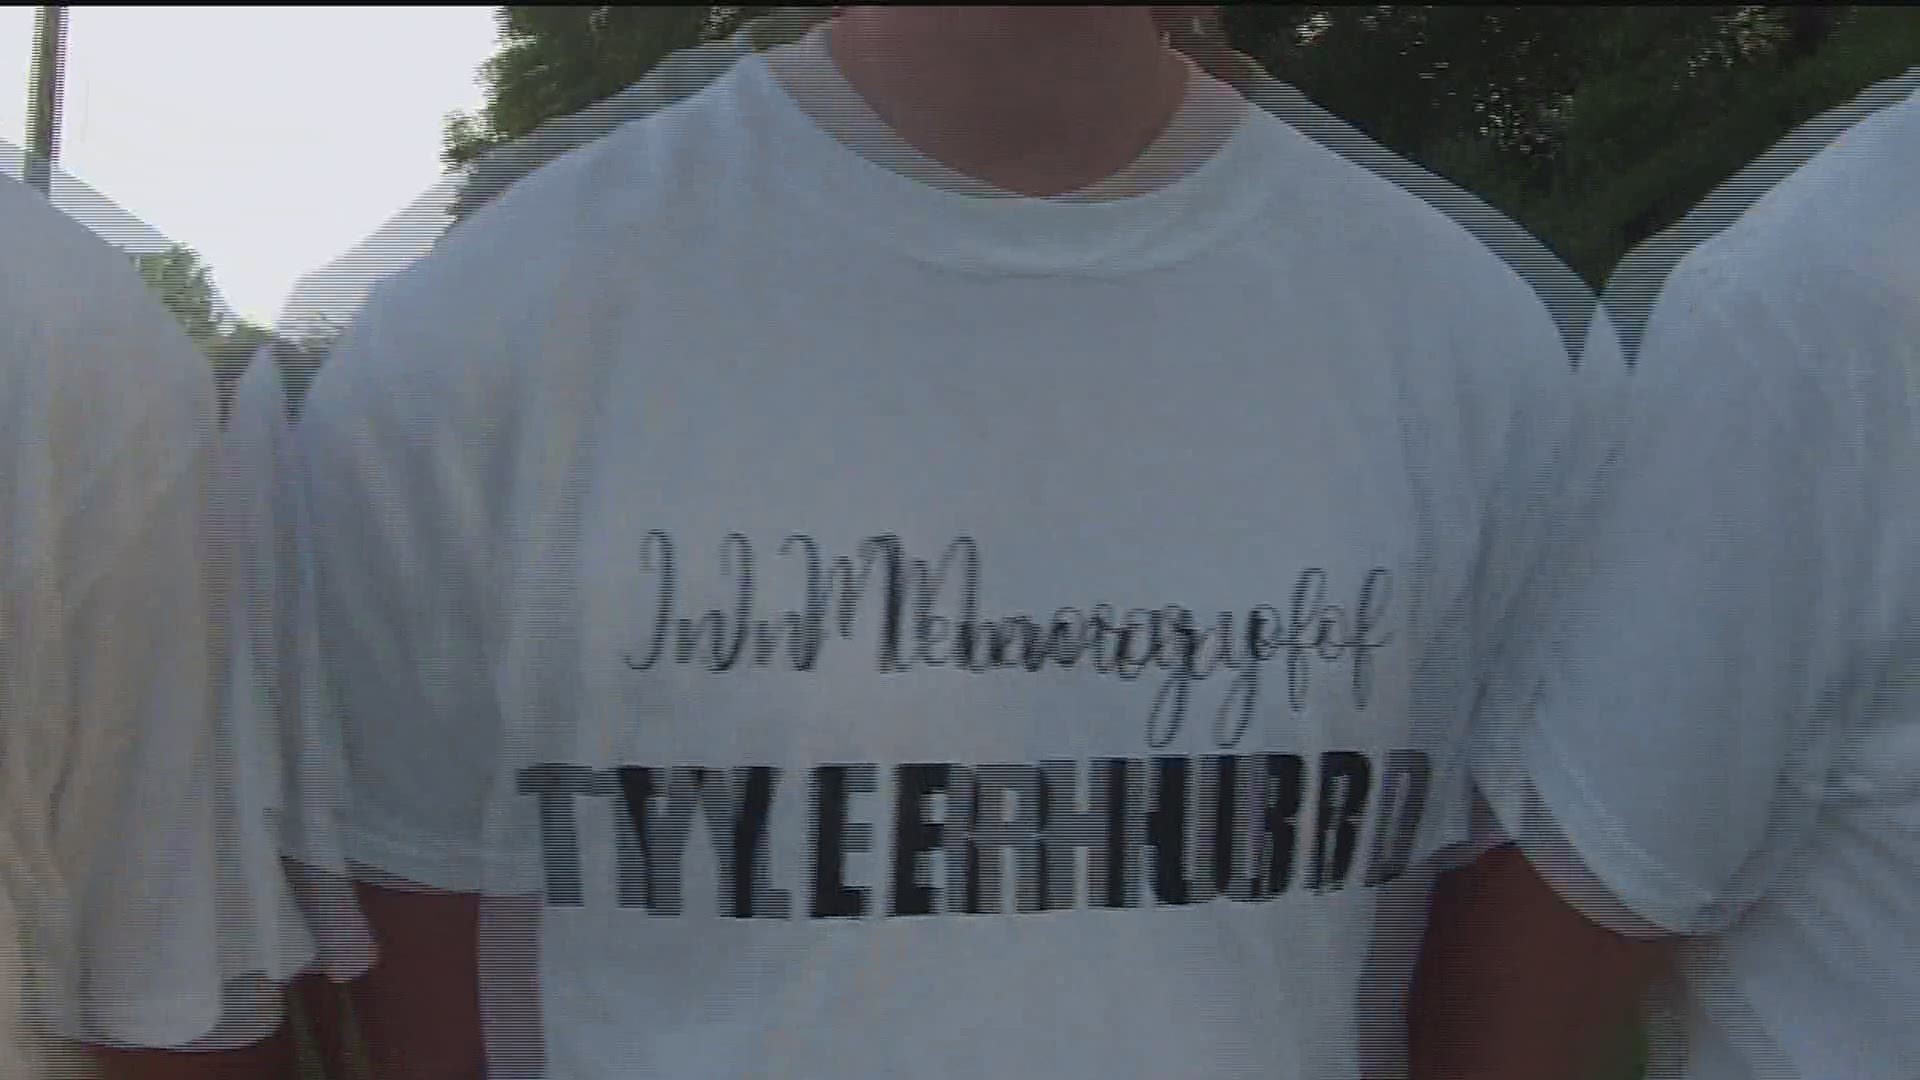 One player made nearly 250 shirts to honor their teammate who passed away unexpectedly.